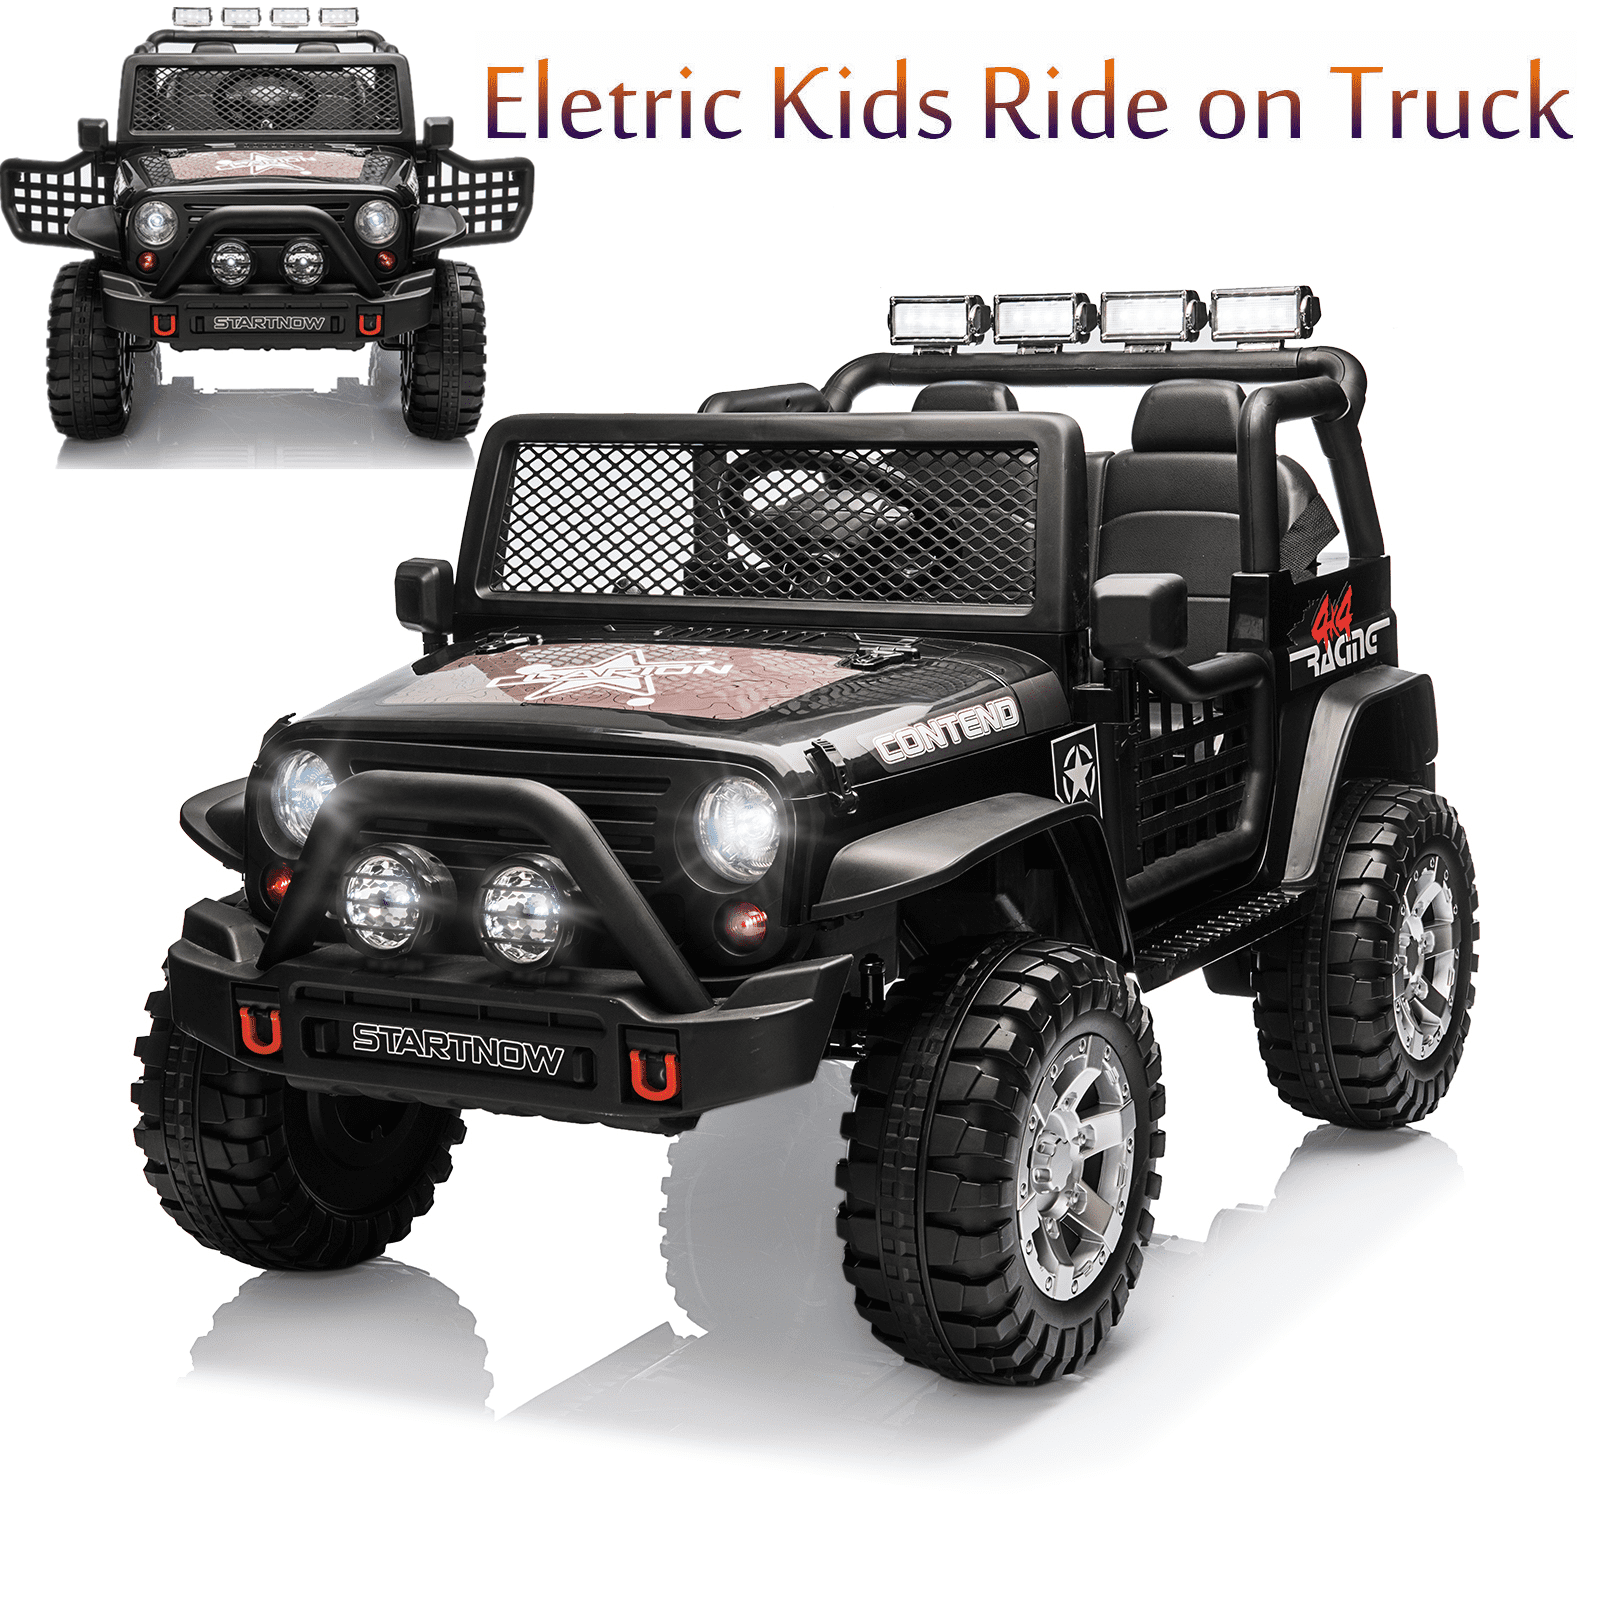 Dazone 12V Kids Ride on Jeep Car, Electric 2 Seats Off-road Jeep Ride on Truck Vehicle with Remote Control, LED Lights, MP3 Music, Black - image 1 of 8